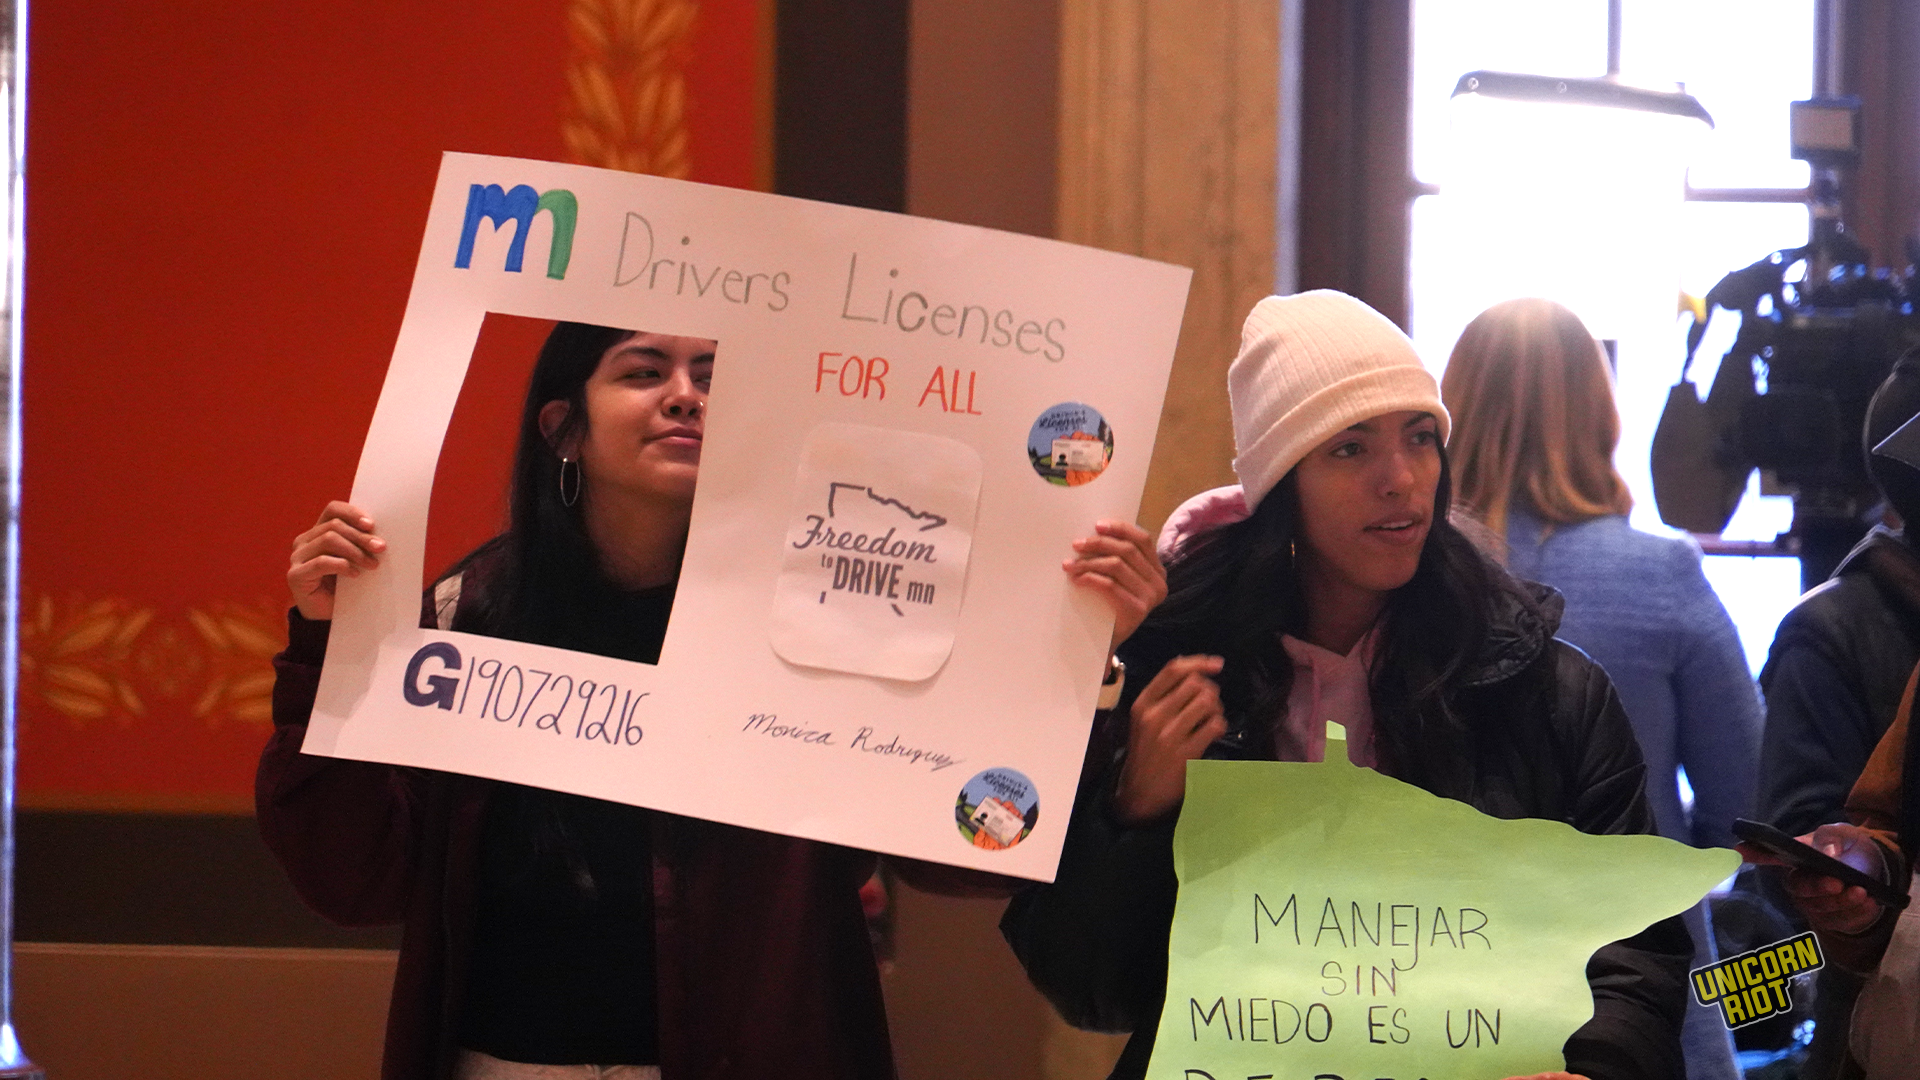 Regardless of immigration status, people in Minnesota can begin applying  for driver's licenses 